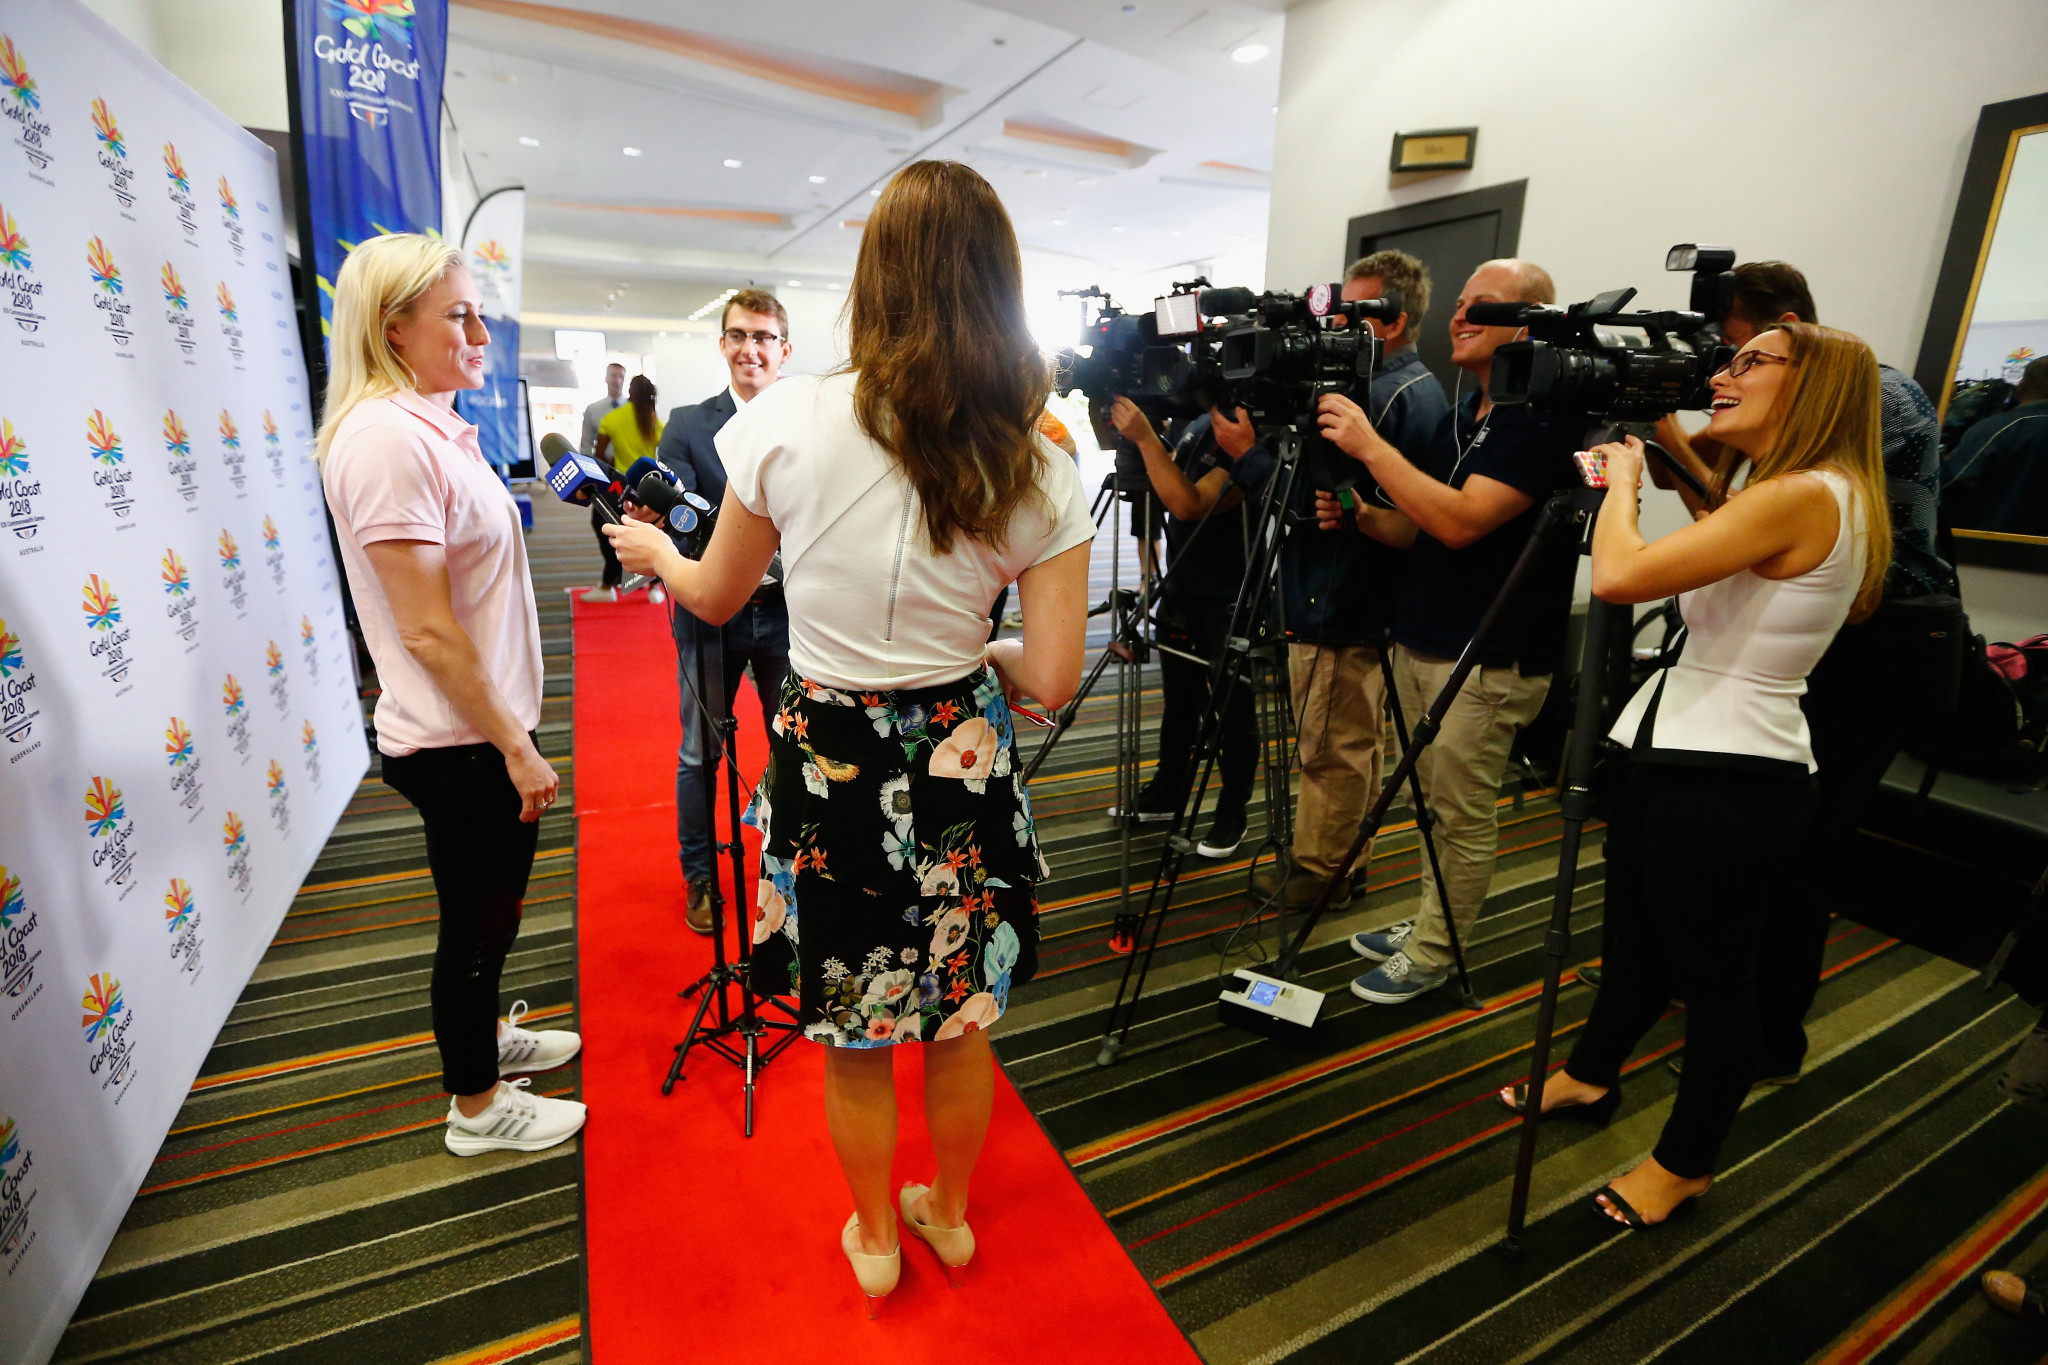 Gold Coast 2018 insist they are working to boost the opportunities for media organisations to have access to athletes and officials during the Commonwealth Games ©Getty Images